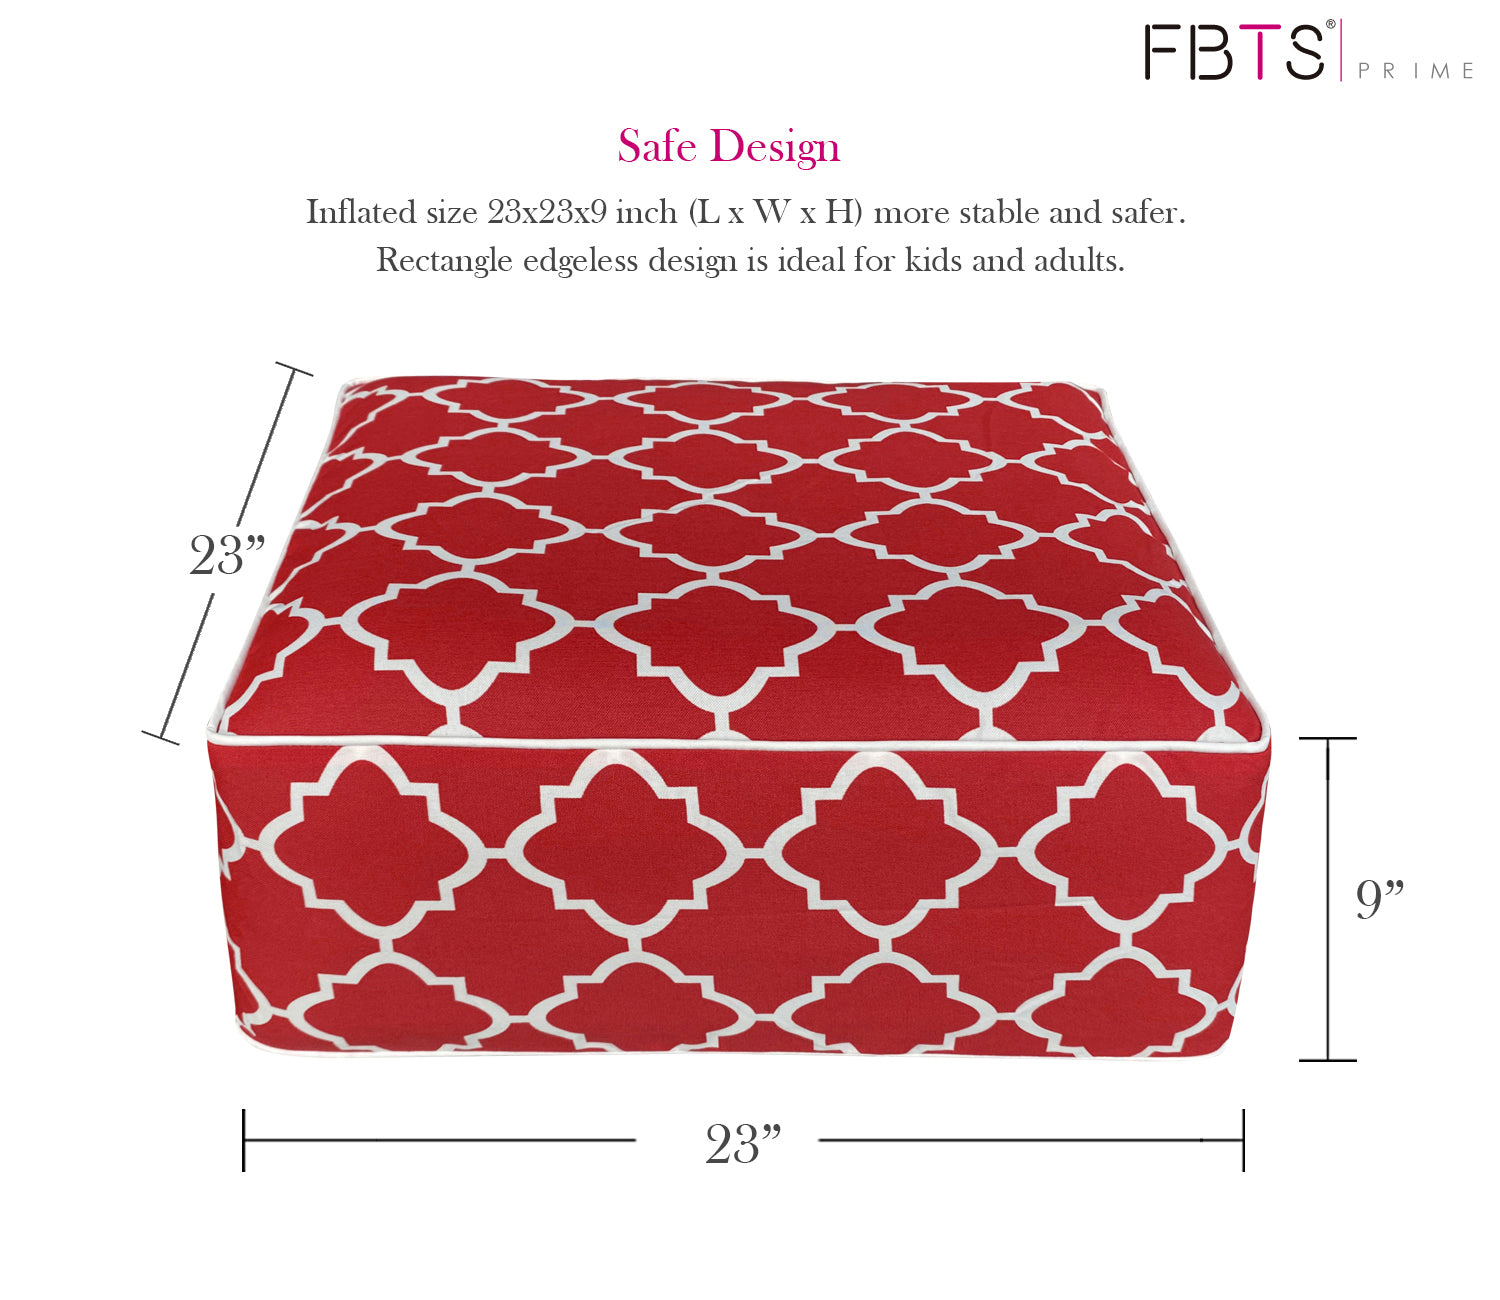 Outdoor Inflatable Ottoman Red Quatrefoil Lattice Square 23x23x9 Inch Patio Foot Stools and Ottomans